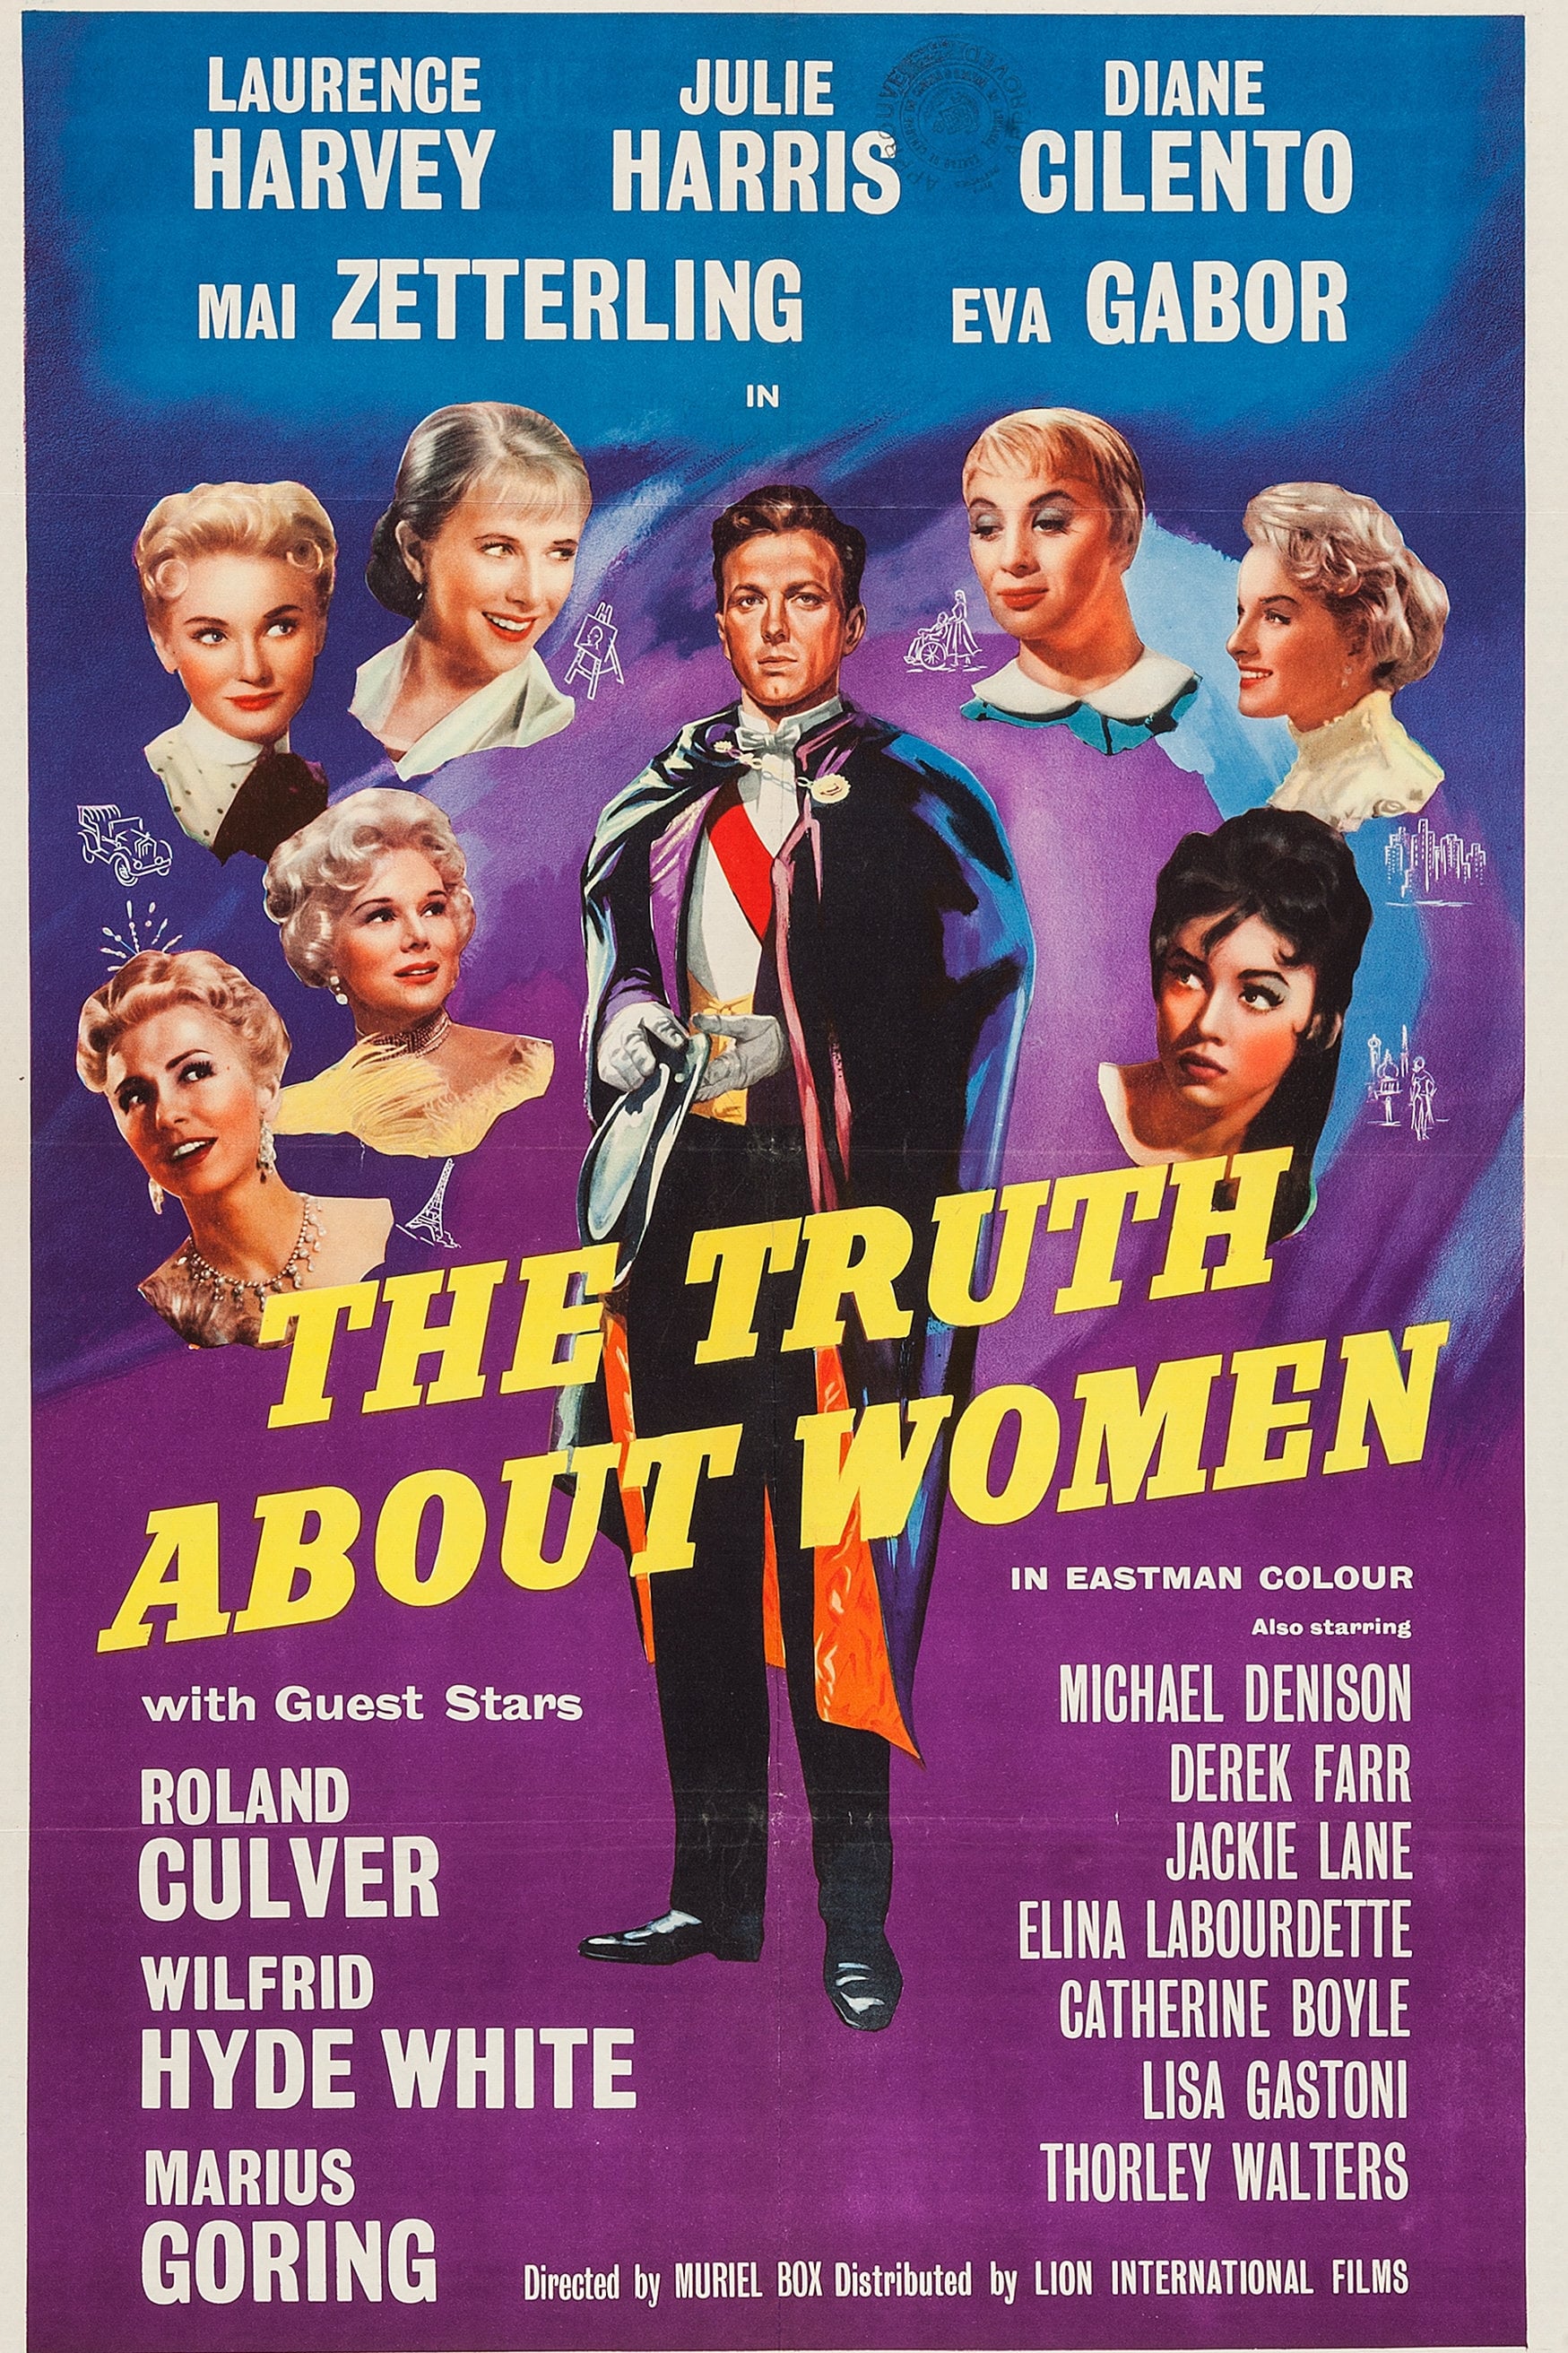 voir film The Truth About Women streaming